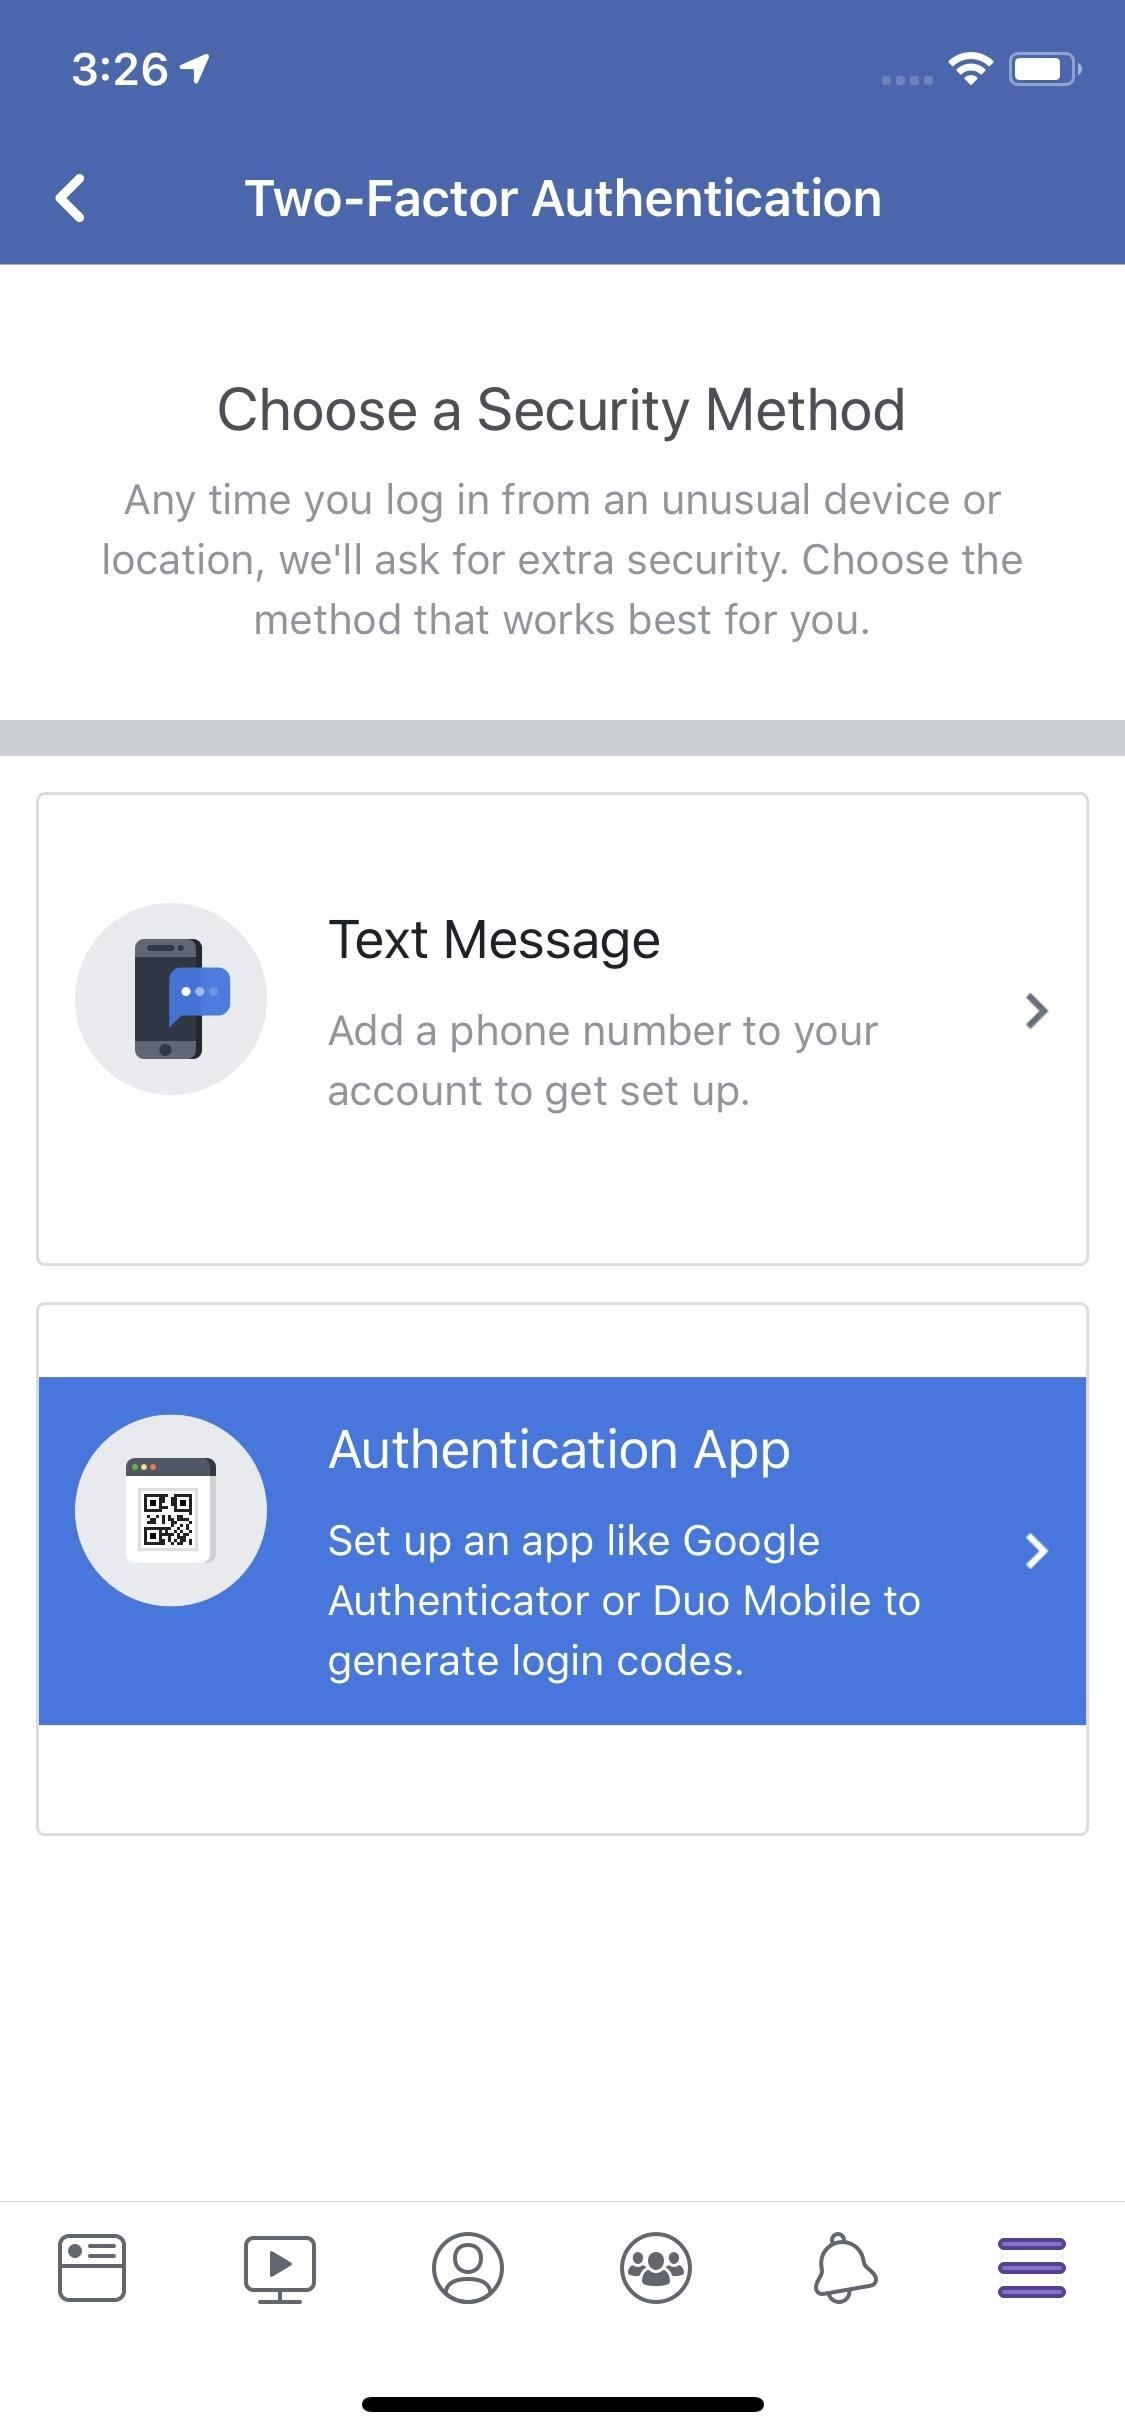 How to Secure Your Facebook Account Using 2FA — Without Making Your Phone Number Public